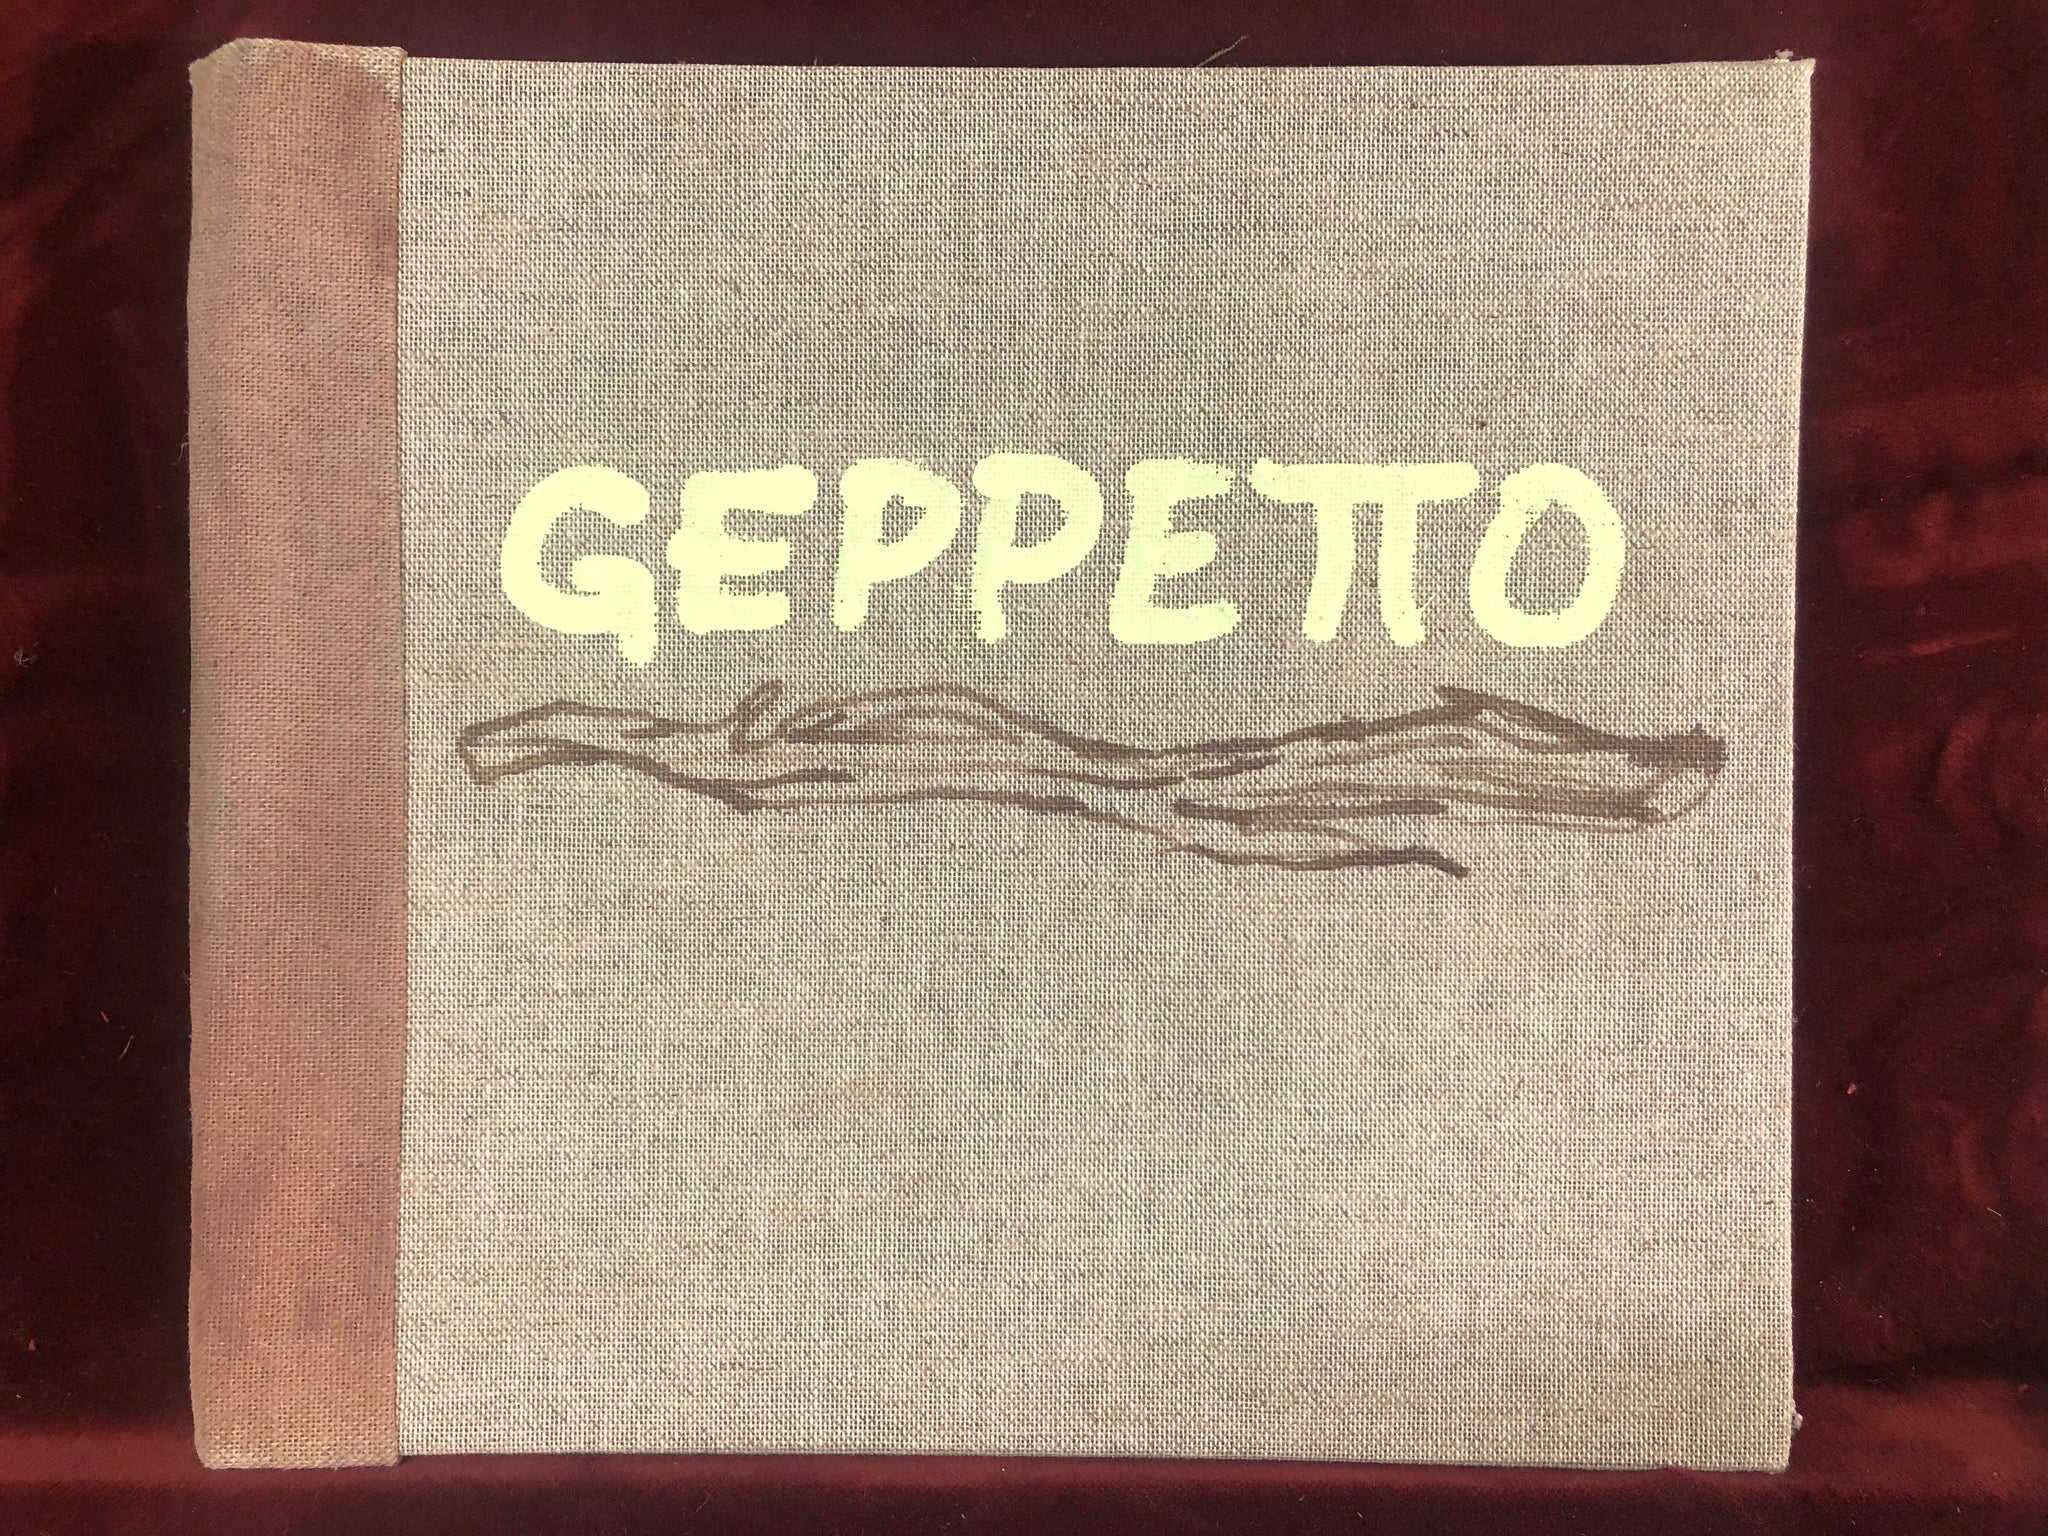 Z Behl, "Geppetto Storybook"